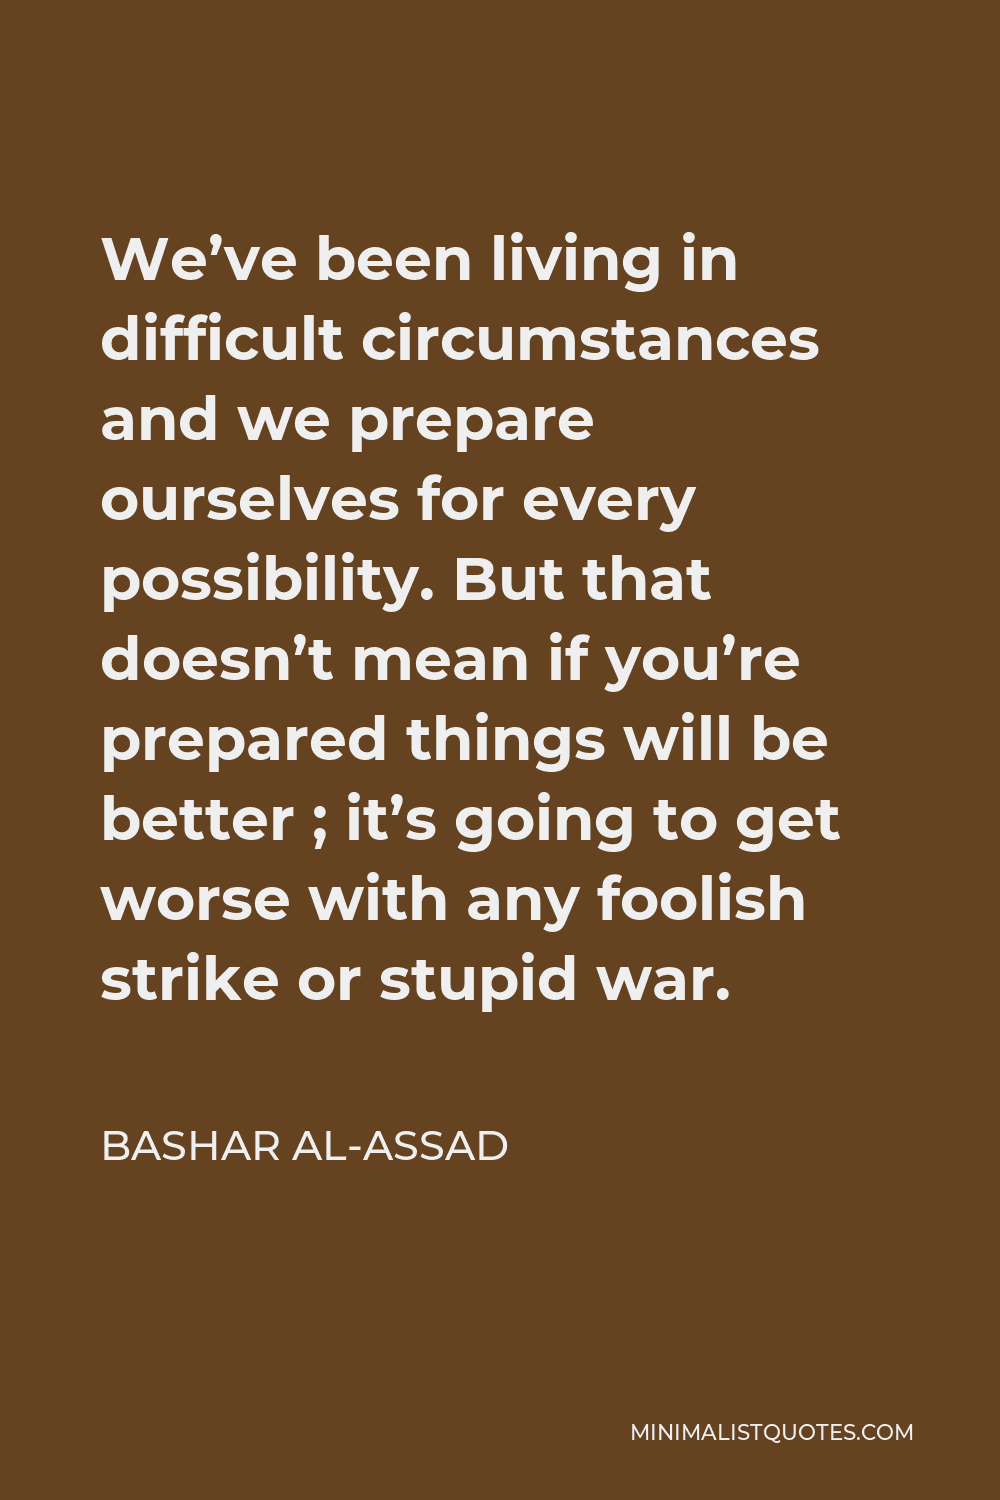 Bashar al-Assad Quote - We’ve been living in difficult circumstances and we prepare ourselves for every possibility. But that doesn’t mean if you’re prepared things will be better ; it’s going to get worse with any foolish strike or stupid war.